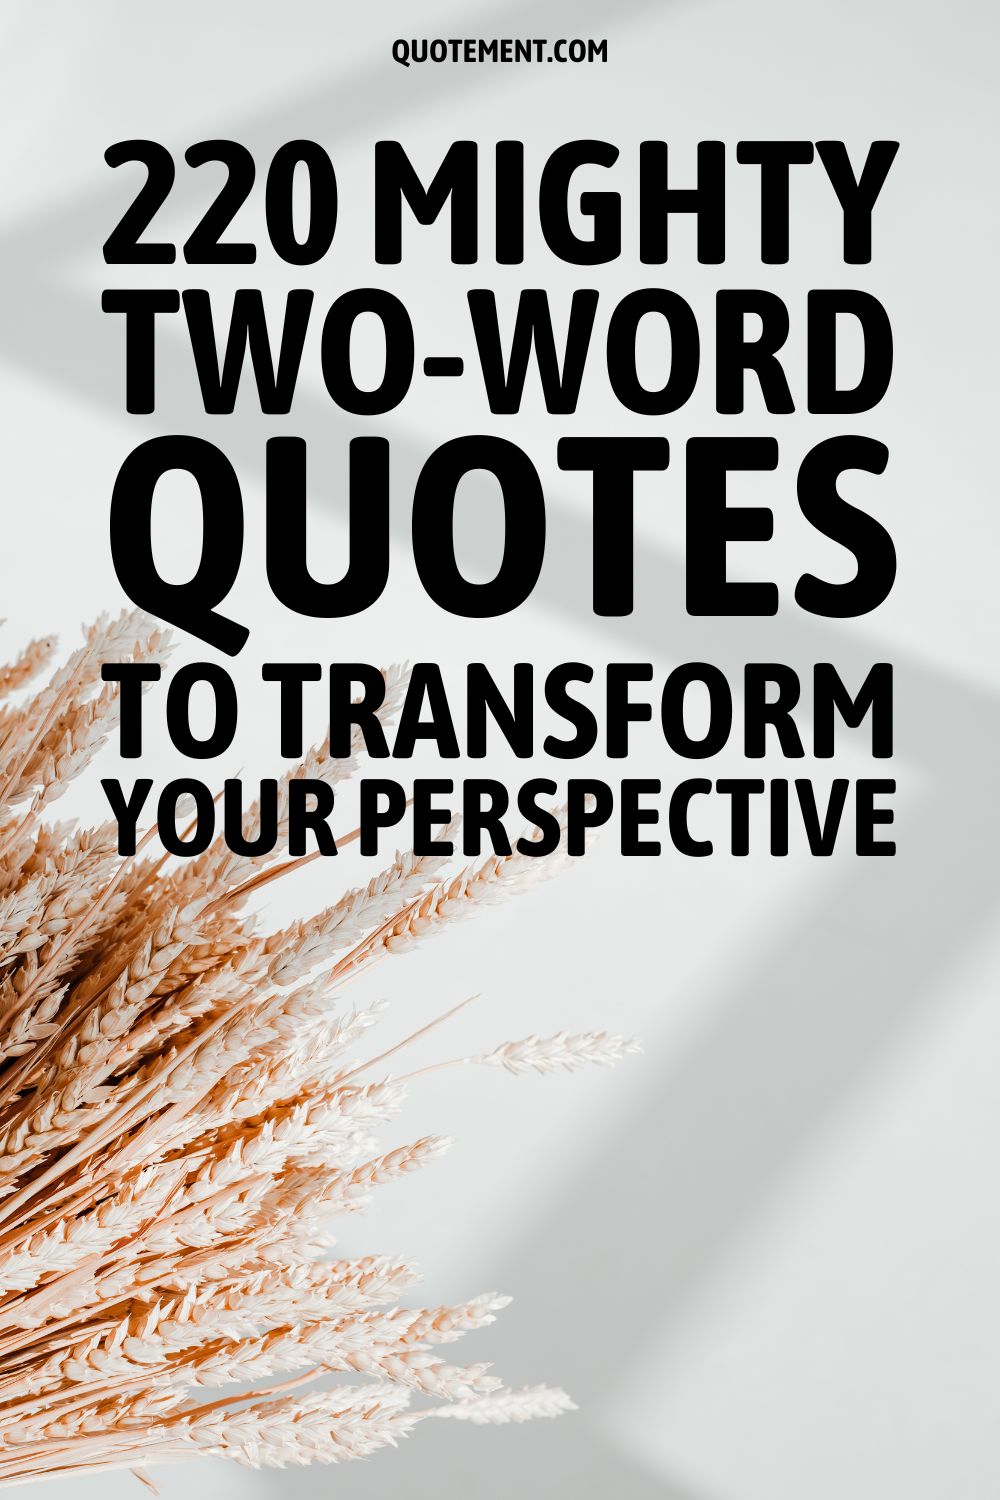 220 Mighty Two-Word Quotes To Transform Your Perspective 